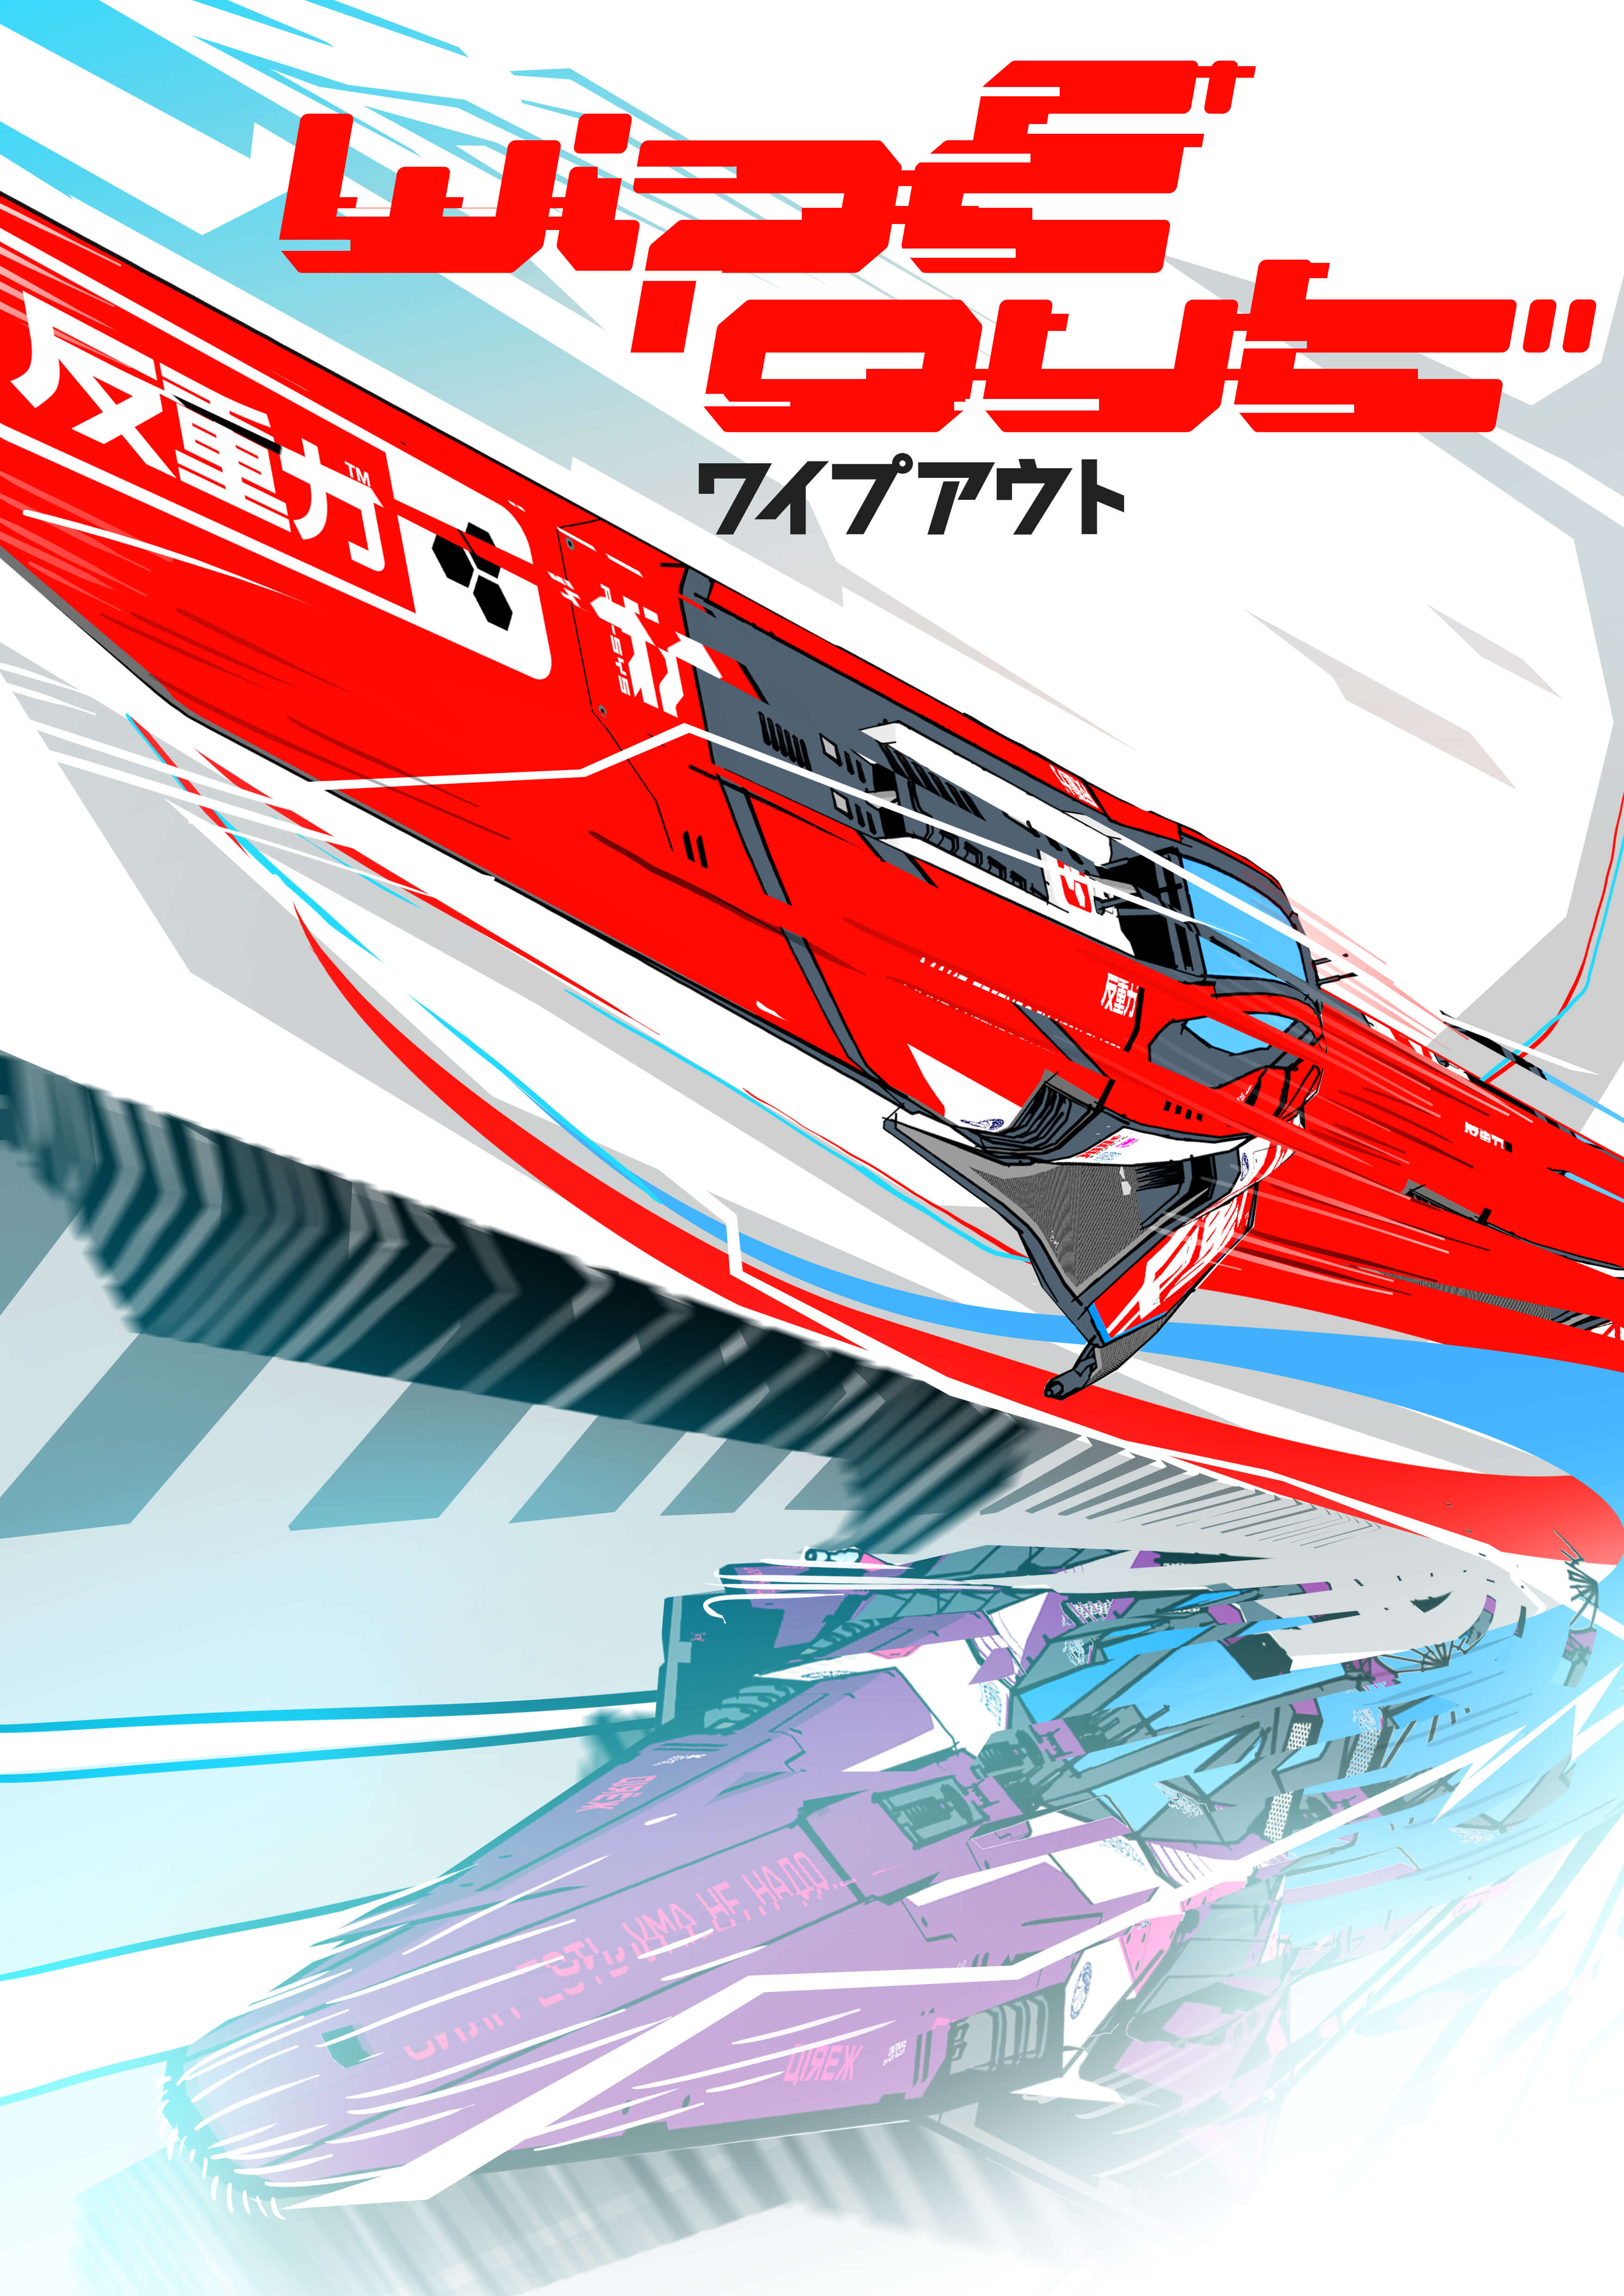 wipeout concept